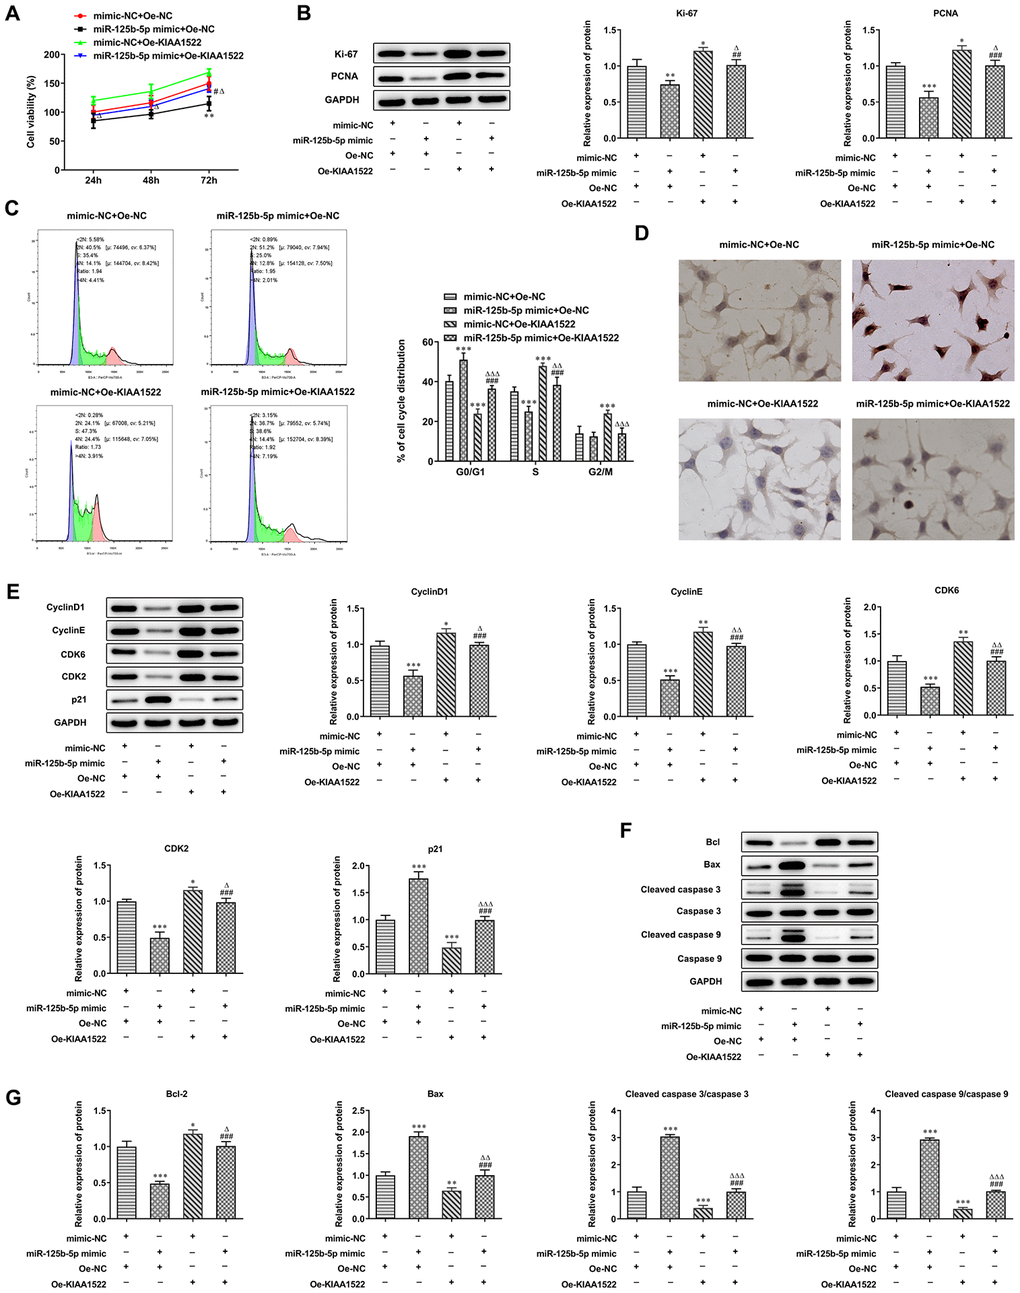 MiR-125b-5p/KIAA1522 axis affects proliferation, cell cycle and apoptosis of HCC cells. (A) The proliferation of Hep3b cells after transfection of miR-125b-5p mimic and Oe-KIAA1522 was detected by CCK-8 assay. **P#PB) The expression of proliferation-related proteins in Hep3b cells after transfection of miR-125b-5p mimic and Oe-KIAA1522 was detected by Western blot analysis. *P##P###PC) The cell cycle of Hep3b cells after transfection of miR-125b-5p mimic and Oe-KIAA1522 was analyzed by flow cytometry analysis. ***P###PD) The apoptosis of Hep3b cells after transfection of miR-125b-5p mimic and Oe-KIAA1522 was shown by TUNEL assay. (E) The expression of cell cycle-related proteins in Hep3b cells after transfection of miR-125b-5p mimic and Oe-KIAA1522 was detected by Western blot analysis. *P###PF, G) The expression of apoptosis-related proteins in Hep3b cells after transfection of miR-125b-5p mimic and Oe-KIAA1522 was detected by Western blot analysis. *P###P